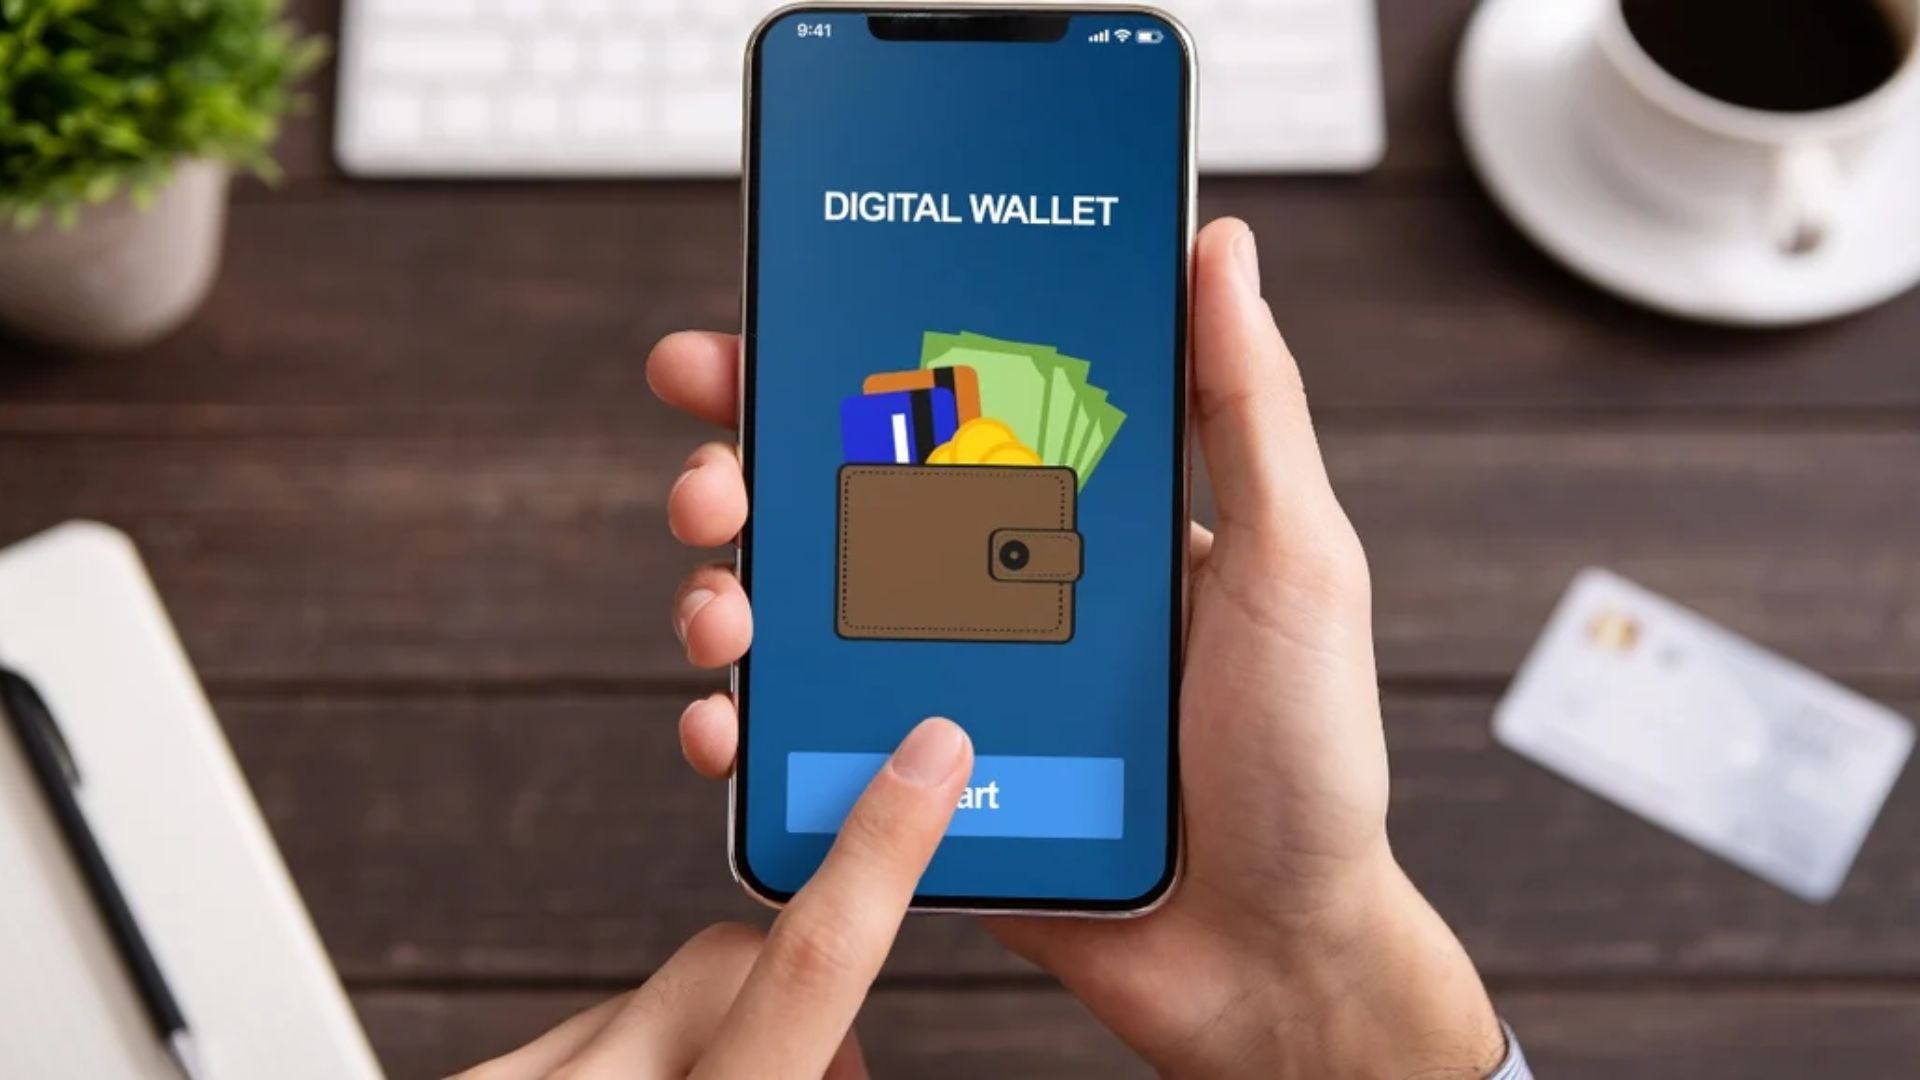 Do Digital Wallets Affect The Use Of Credit Cards?